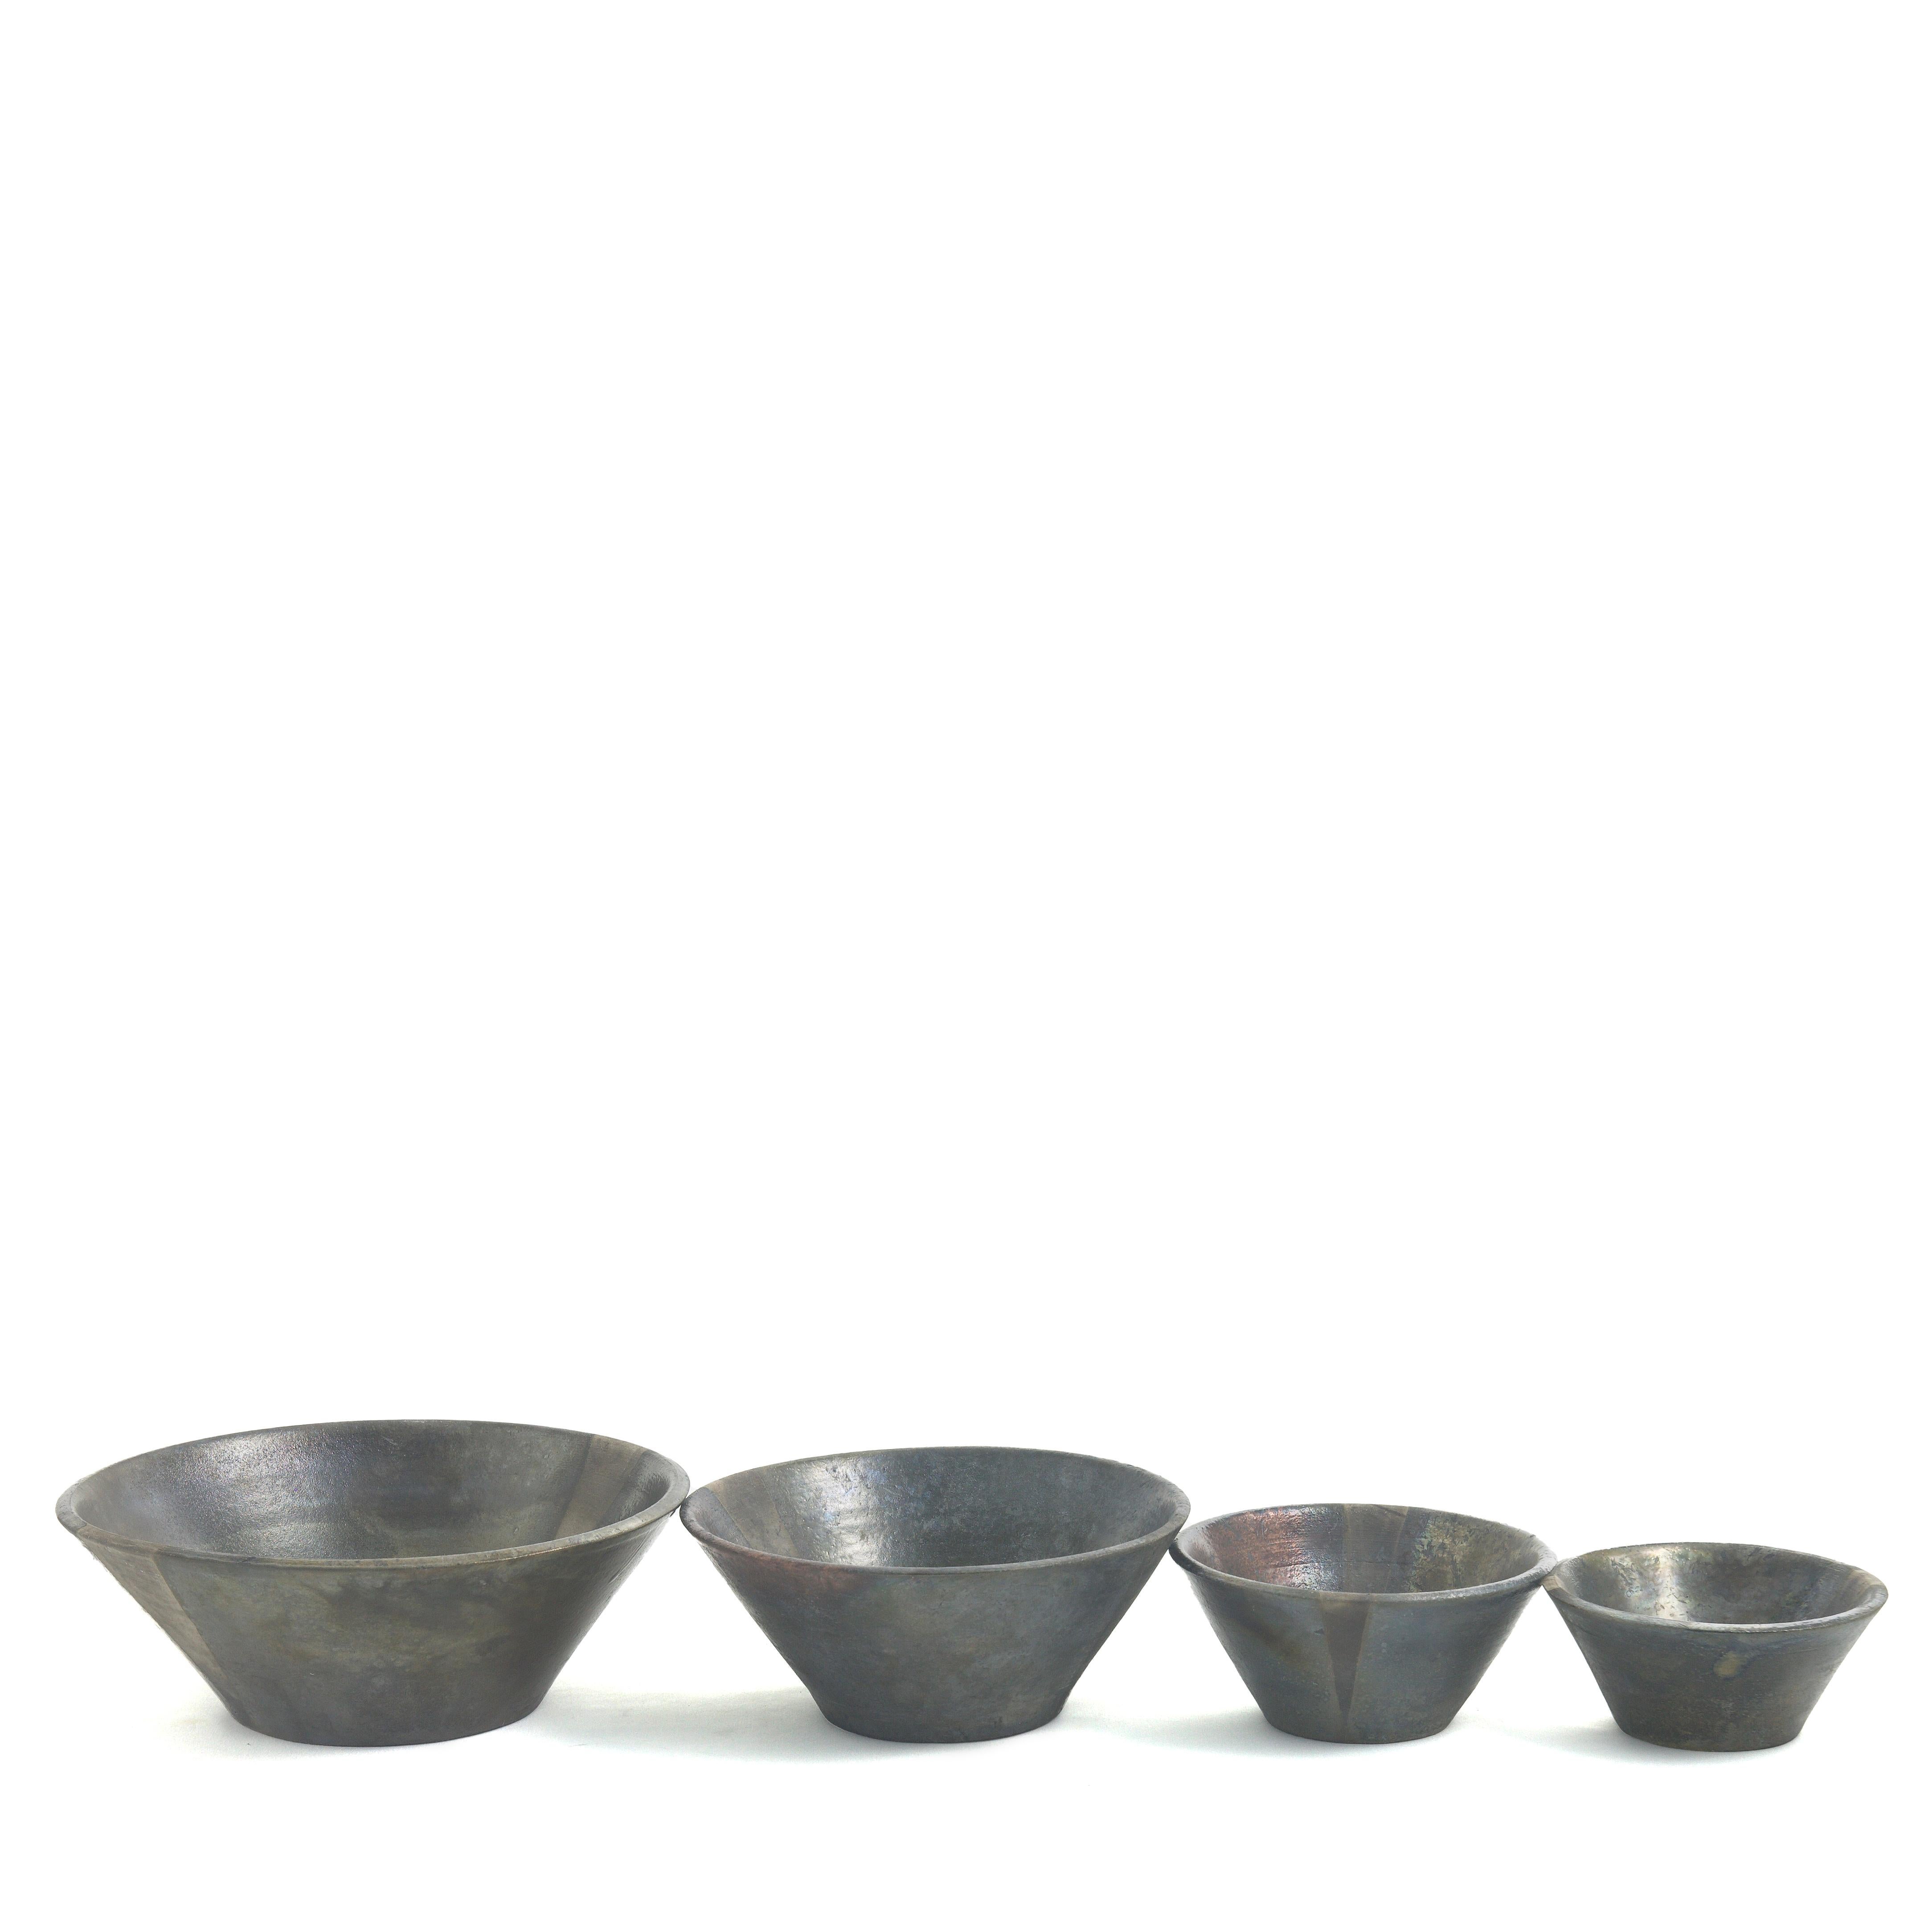 Blackfringe Set Of 4 Bowls

Defined by a bold and clean-lined silhouette, the four bowls composing this set handcrafted from Raku-style ceramic echo the refined charm of Japanese pottery. Their dark appearance is brightened up by metallic